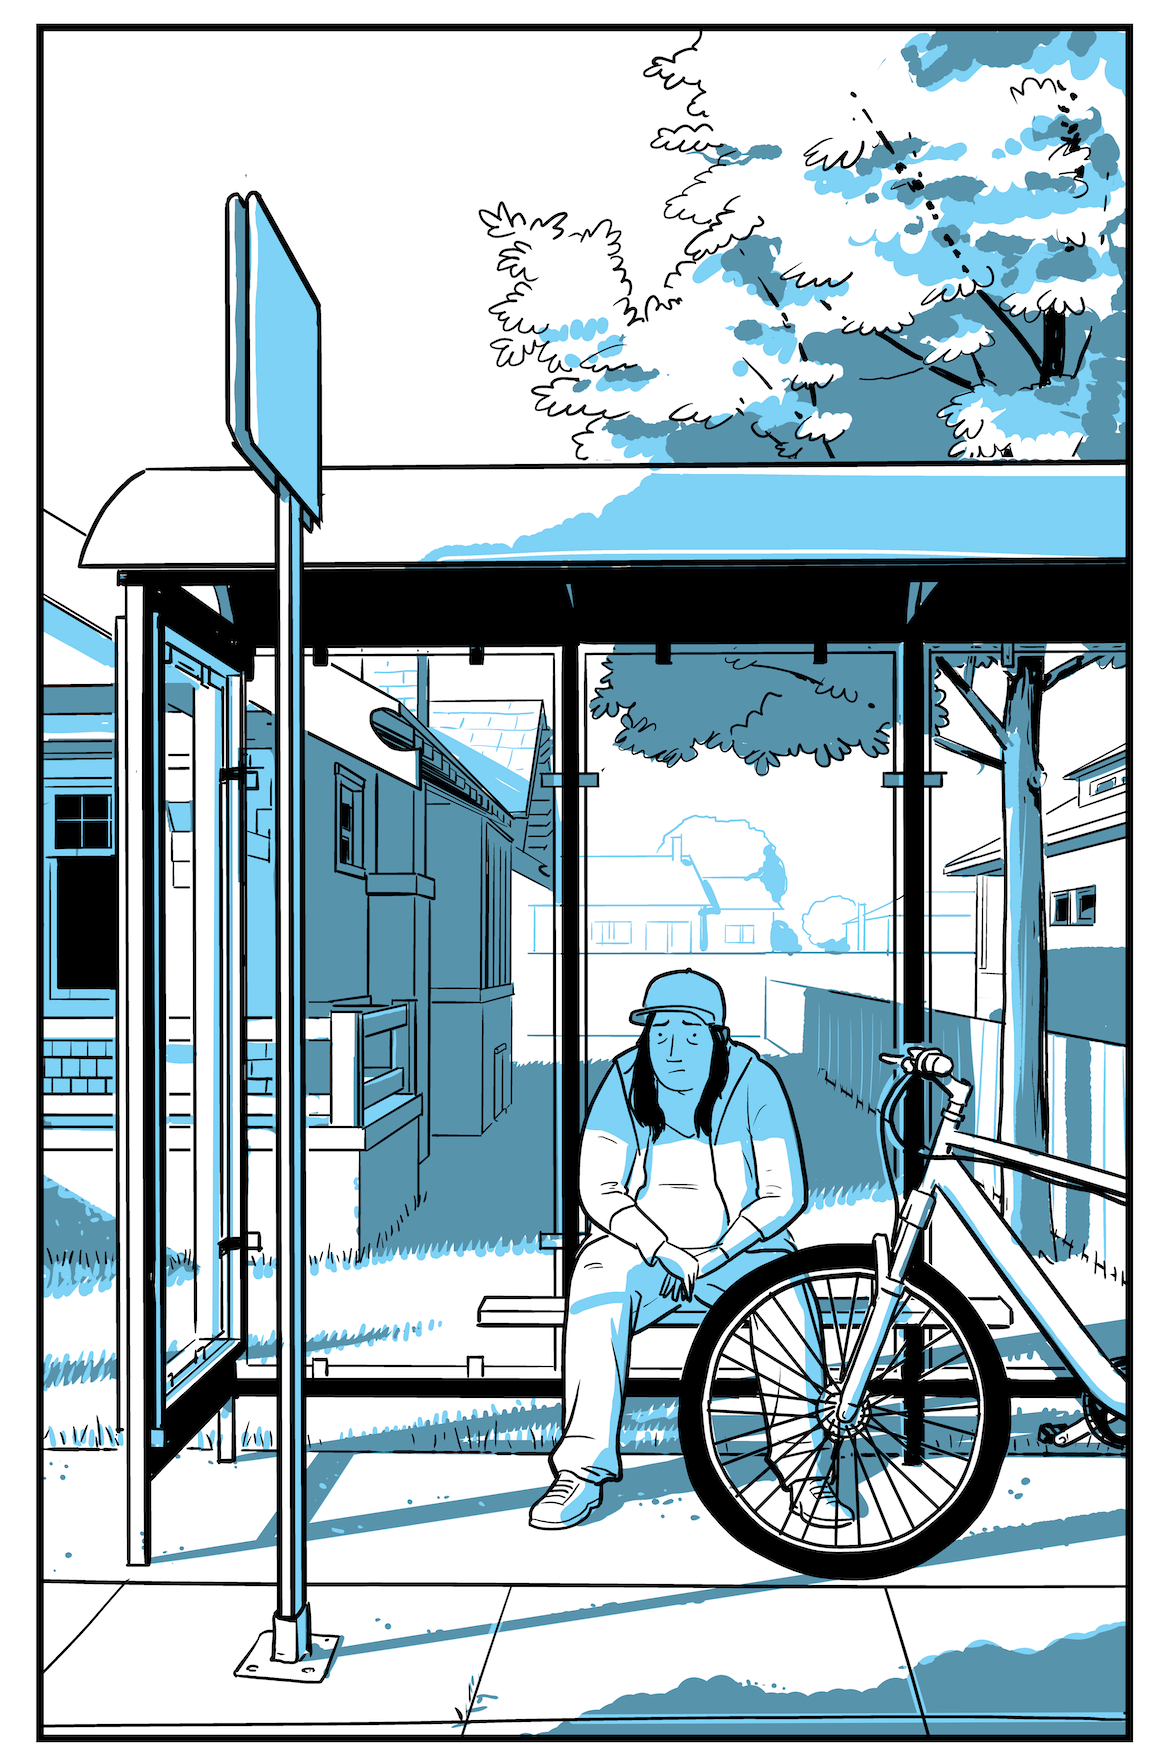 A woman sits at a bus stop waiting for a bus. Next to her is a bicycle. Something is bothering her. 